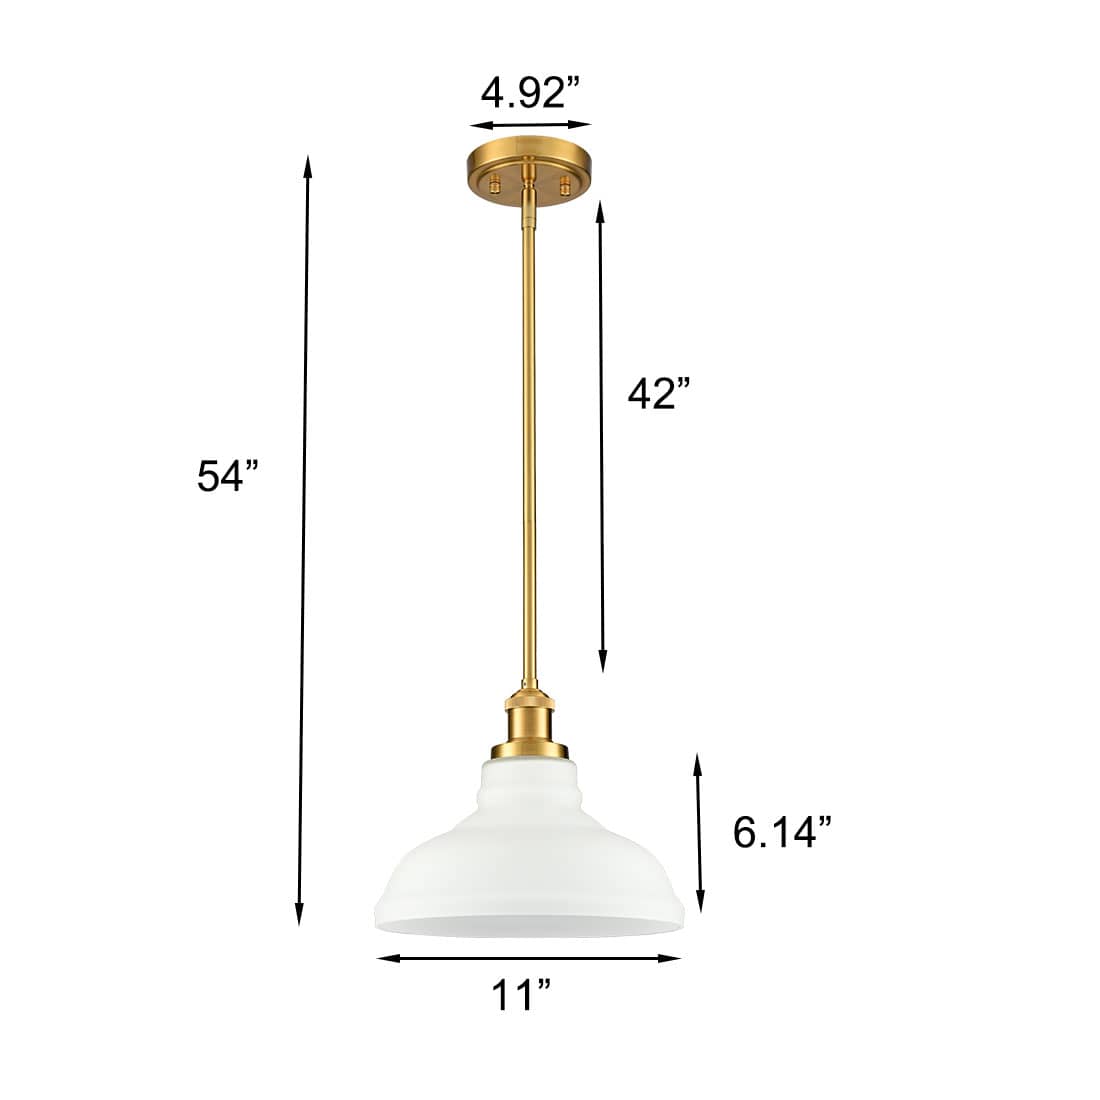 Modern Gold Pendant Light Fixture Kitchen Island with Dome Opal Glass